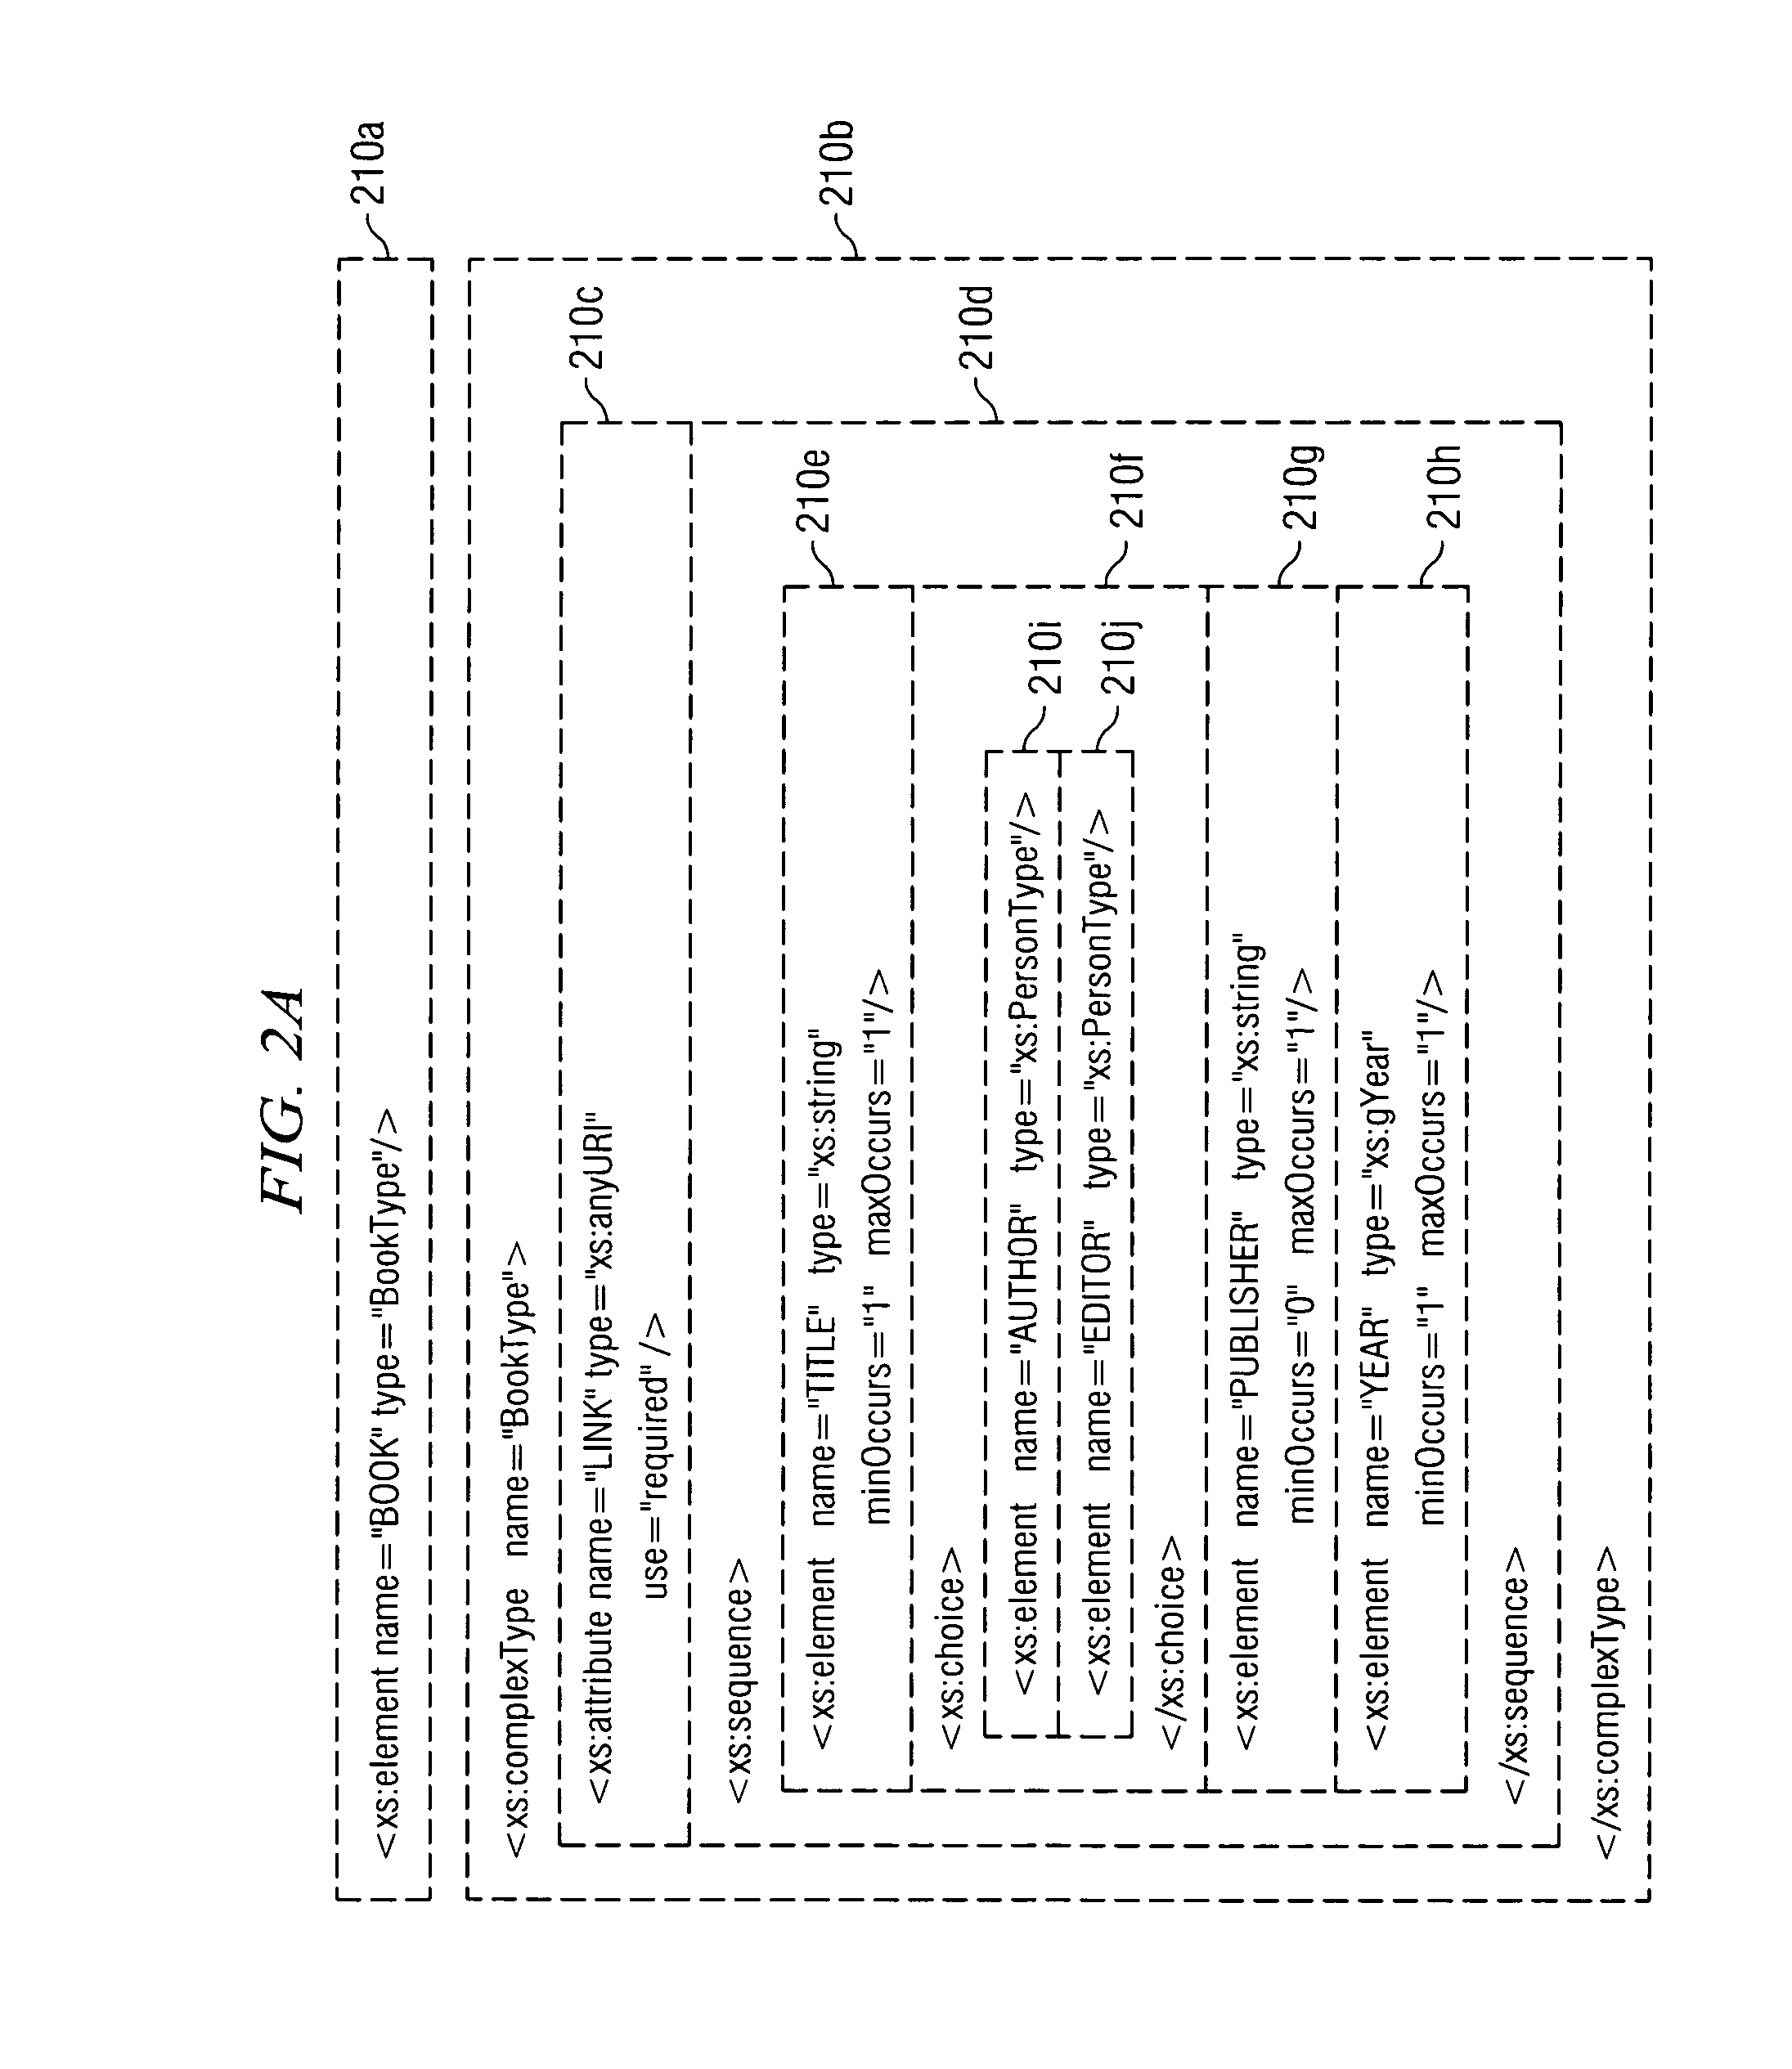 Method and system for decoding encoded documents